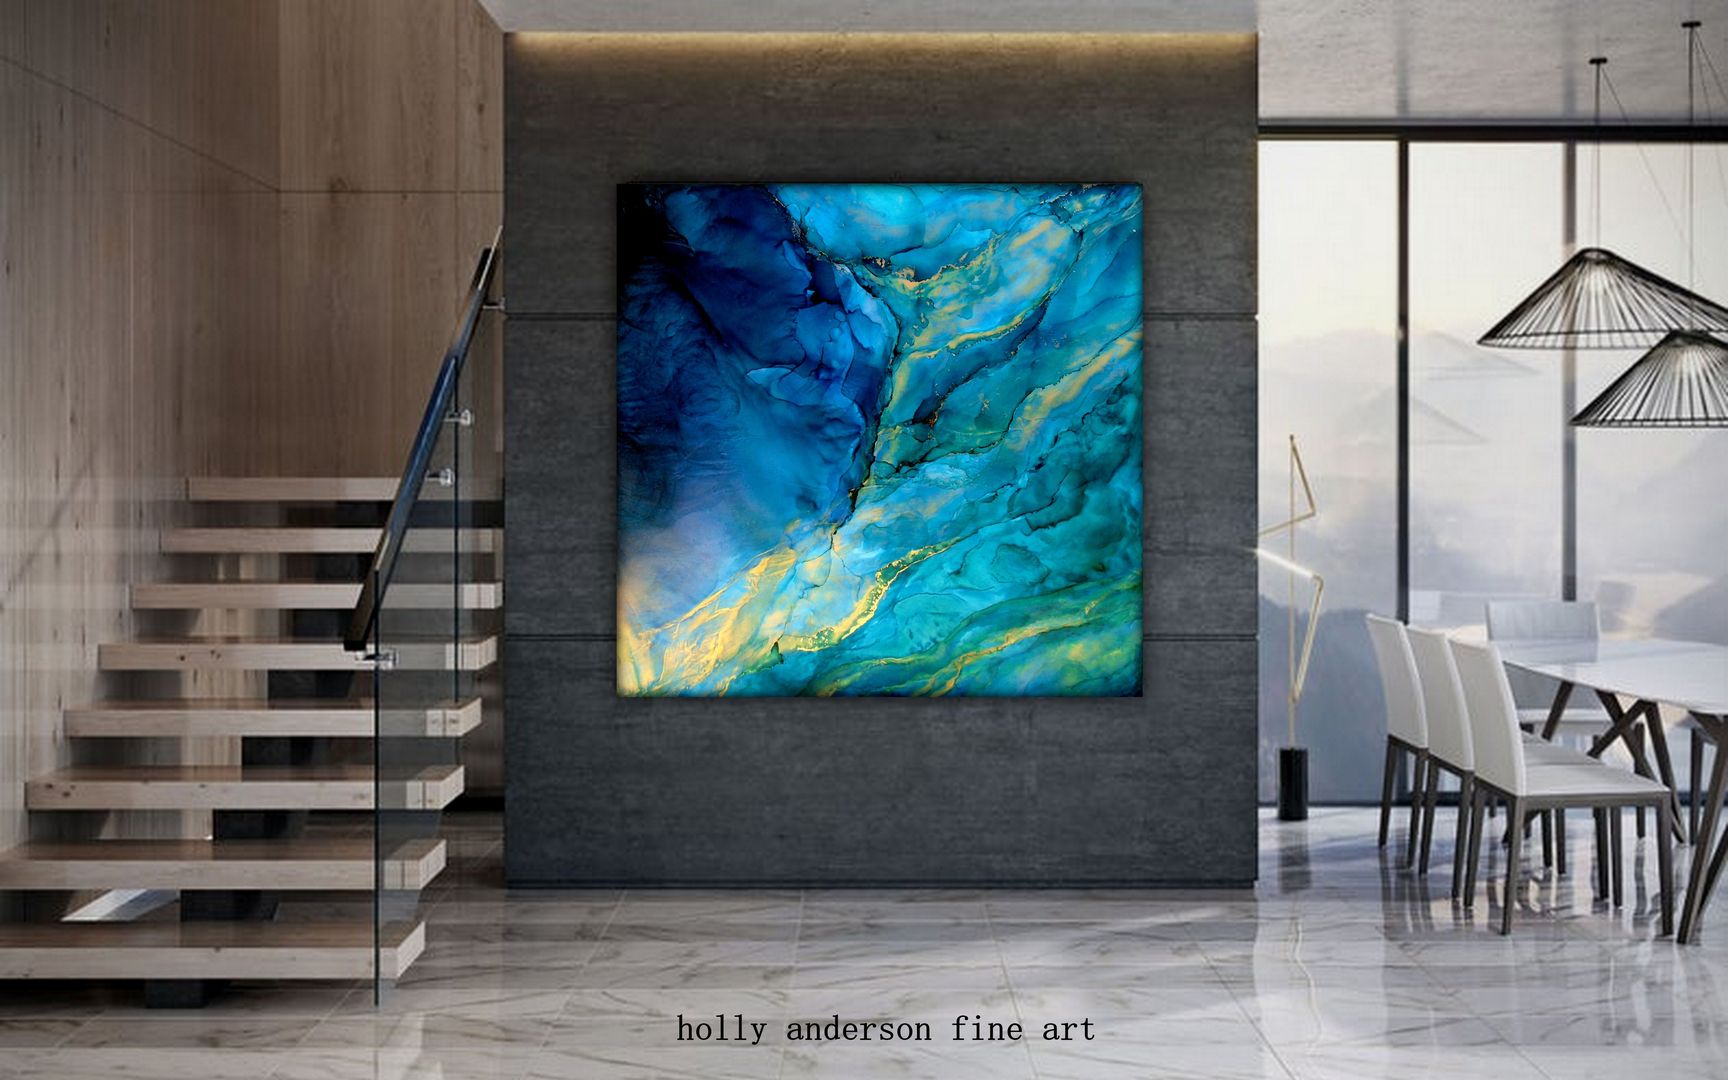 Original Large Alcohol Ink Art Fluid Painting Blue, Green, Gold colors, Abstract Art, Underwater Painting, modern art GLACIRI Holly Anderson Fine Art Modern Living Room glacier painting, underwater paintings, water painting, abstract water, contemporary water, modern water, organic, fluid paintings, large wall art water, large wall art canvas, holly anderson fine art, fluid poured paintings, fluid alcohol ink original, alcohol ink original, large fluid alcohol ink painting, blue and gold, blues and purple, abstract blue, modern organic art, modern wall art, office wall art, hotel wall art, abstract glacier, galactic, nature wall art, cosmic, ethereal, calming